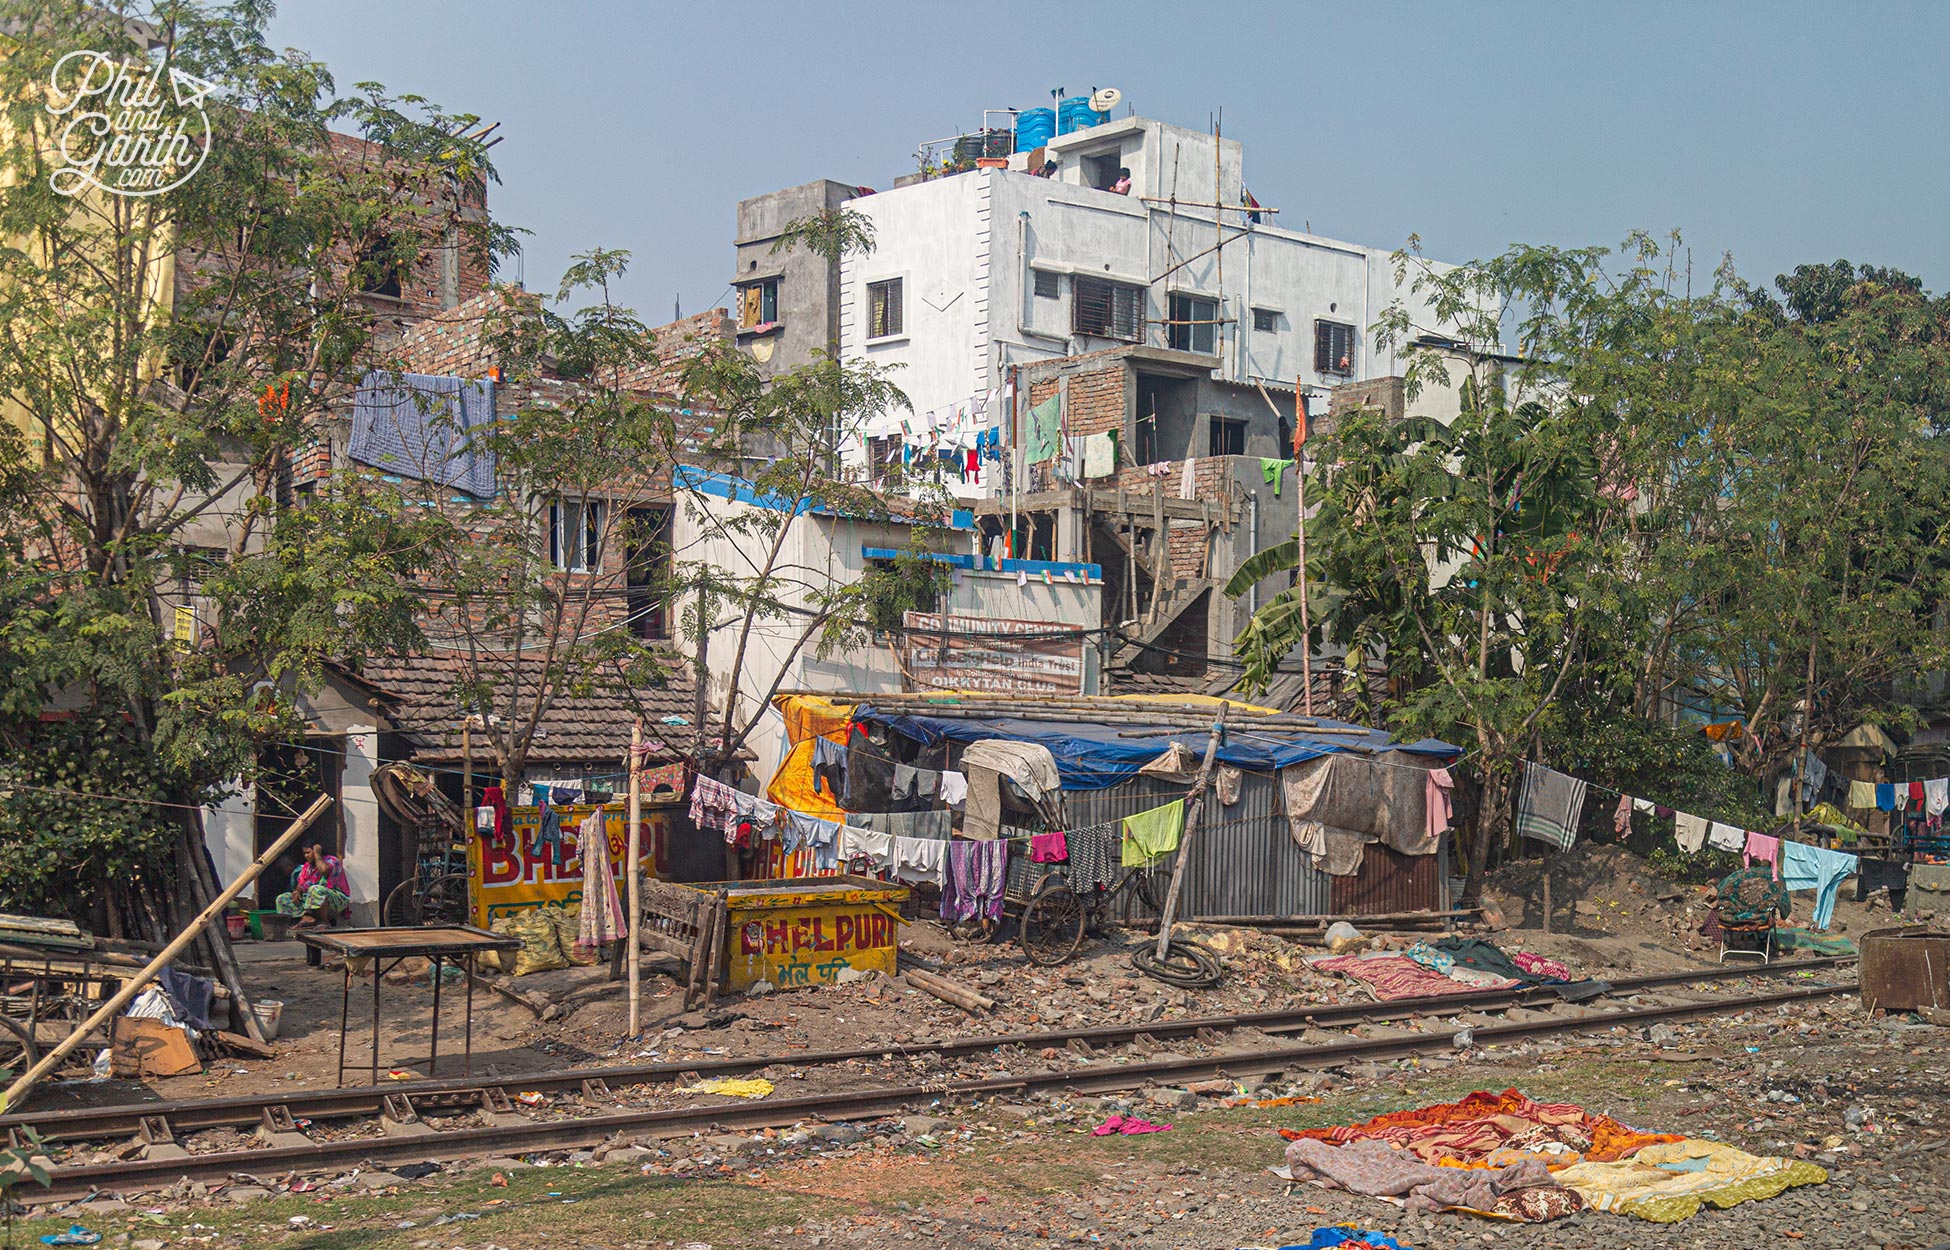 Views out of the window as we arrive approach Kolkata. Many poor people live right on the tracks